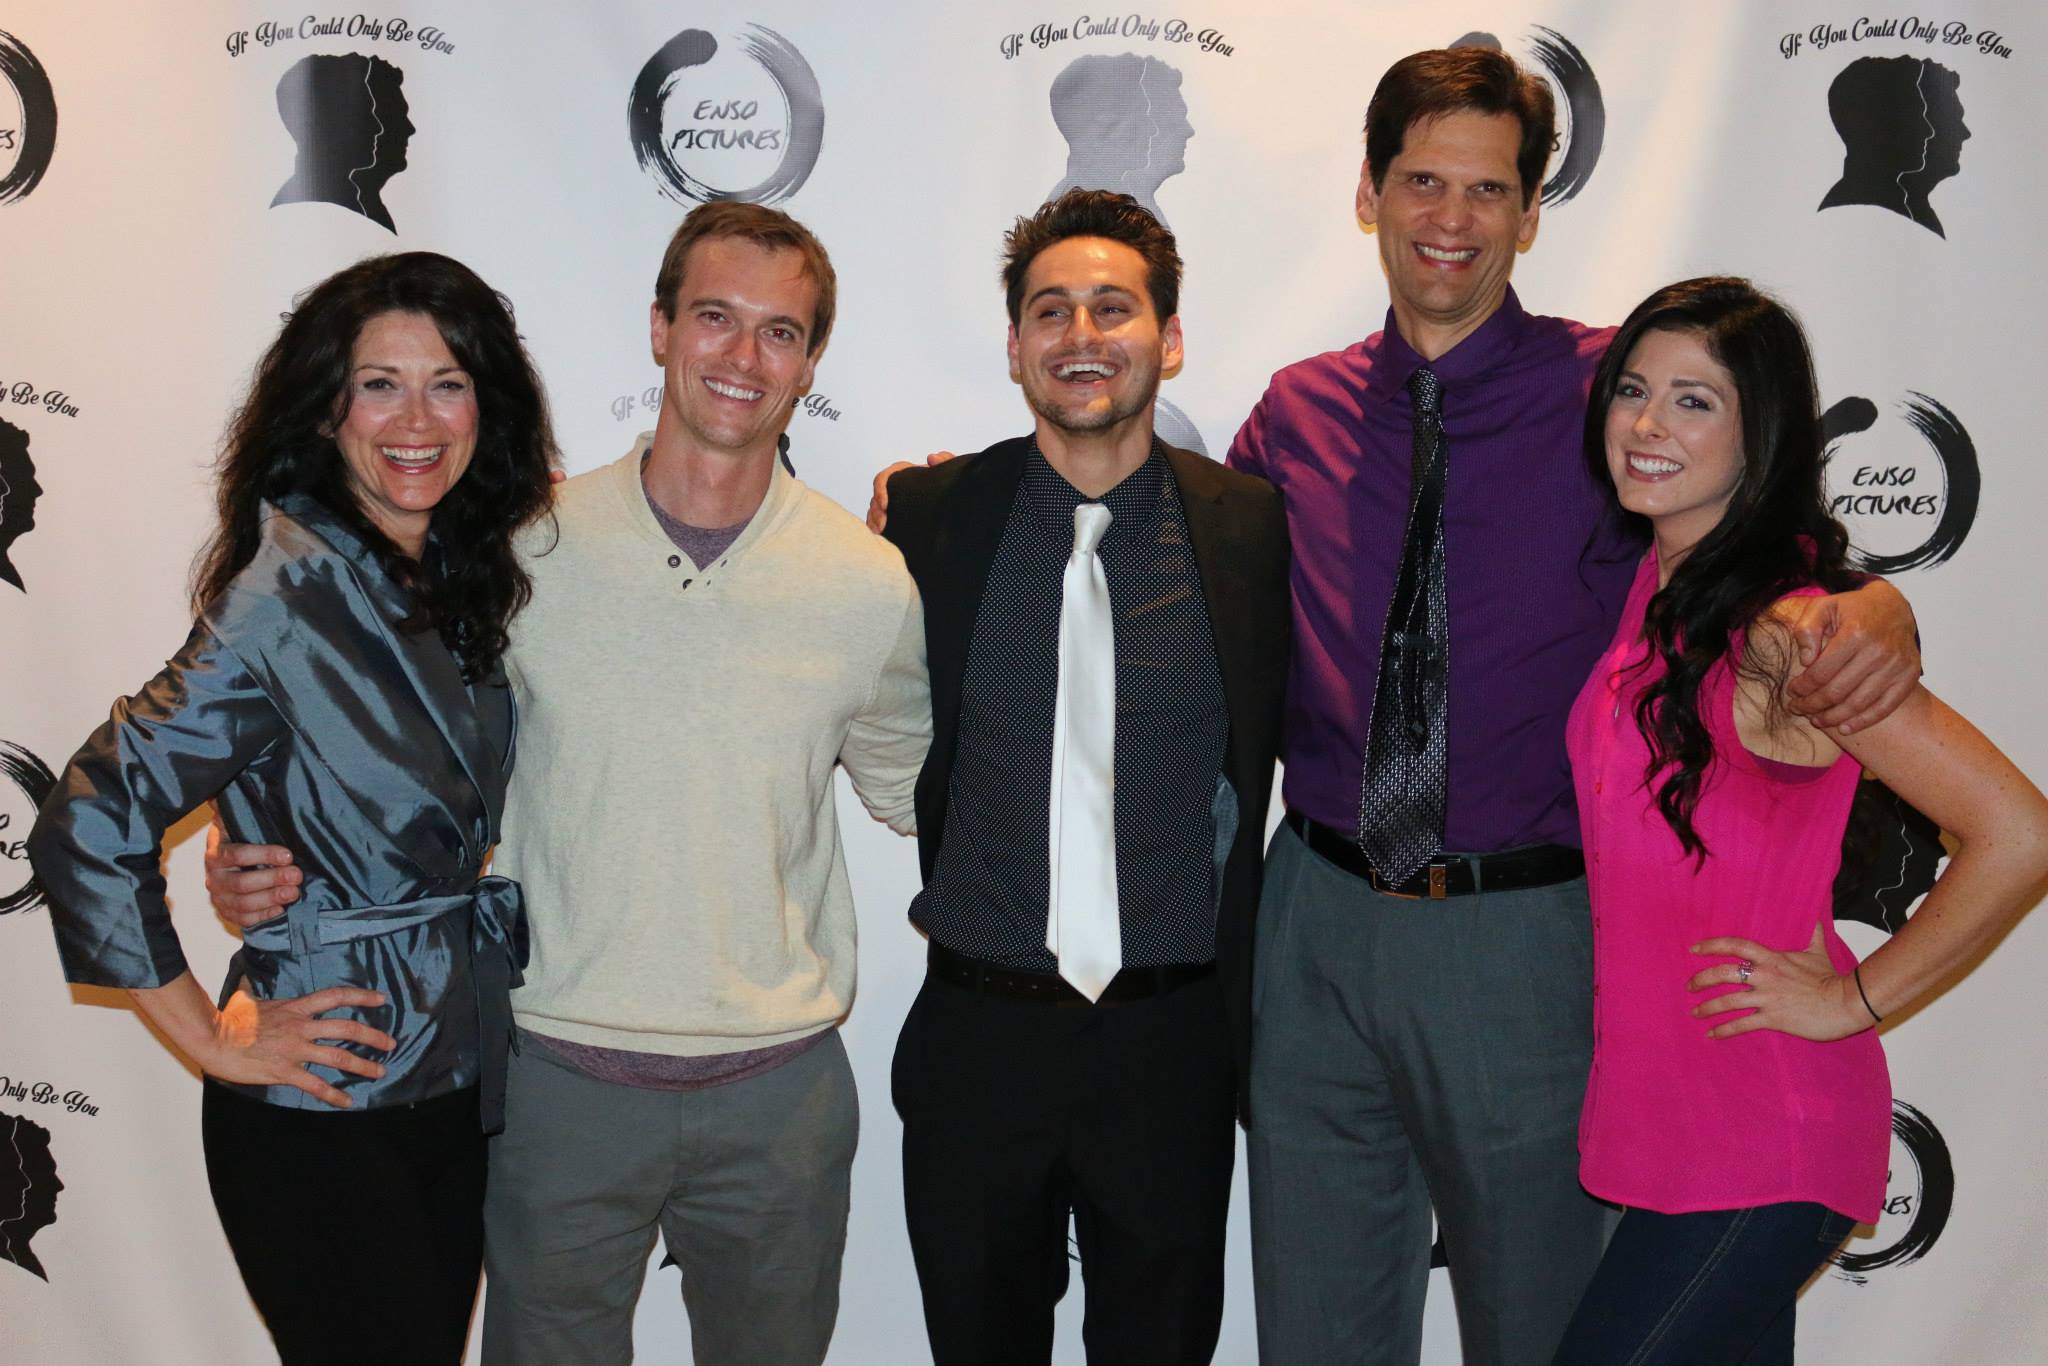 With the cast and director at the premiere of If You Could Only Be You , Jan 2015. With Caroline Redekopp, Phillip Pruitt, Jared Kahn, Robert Seeley, Morgan Matthews.